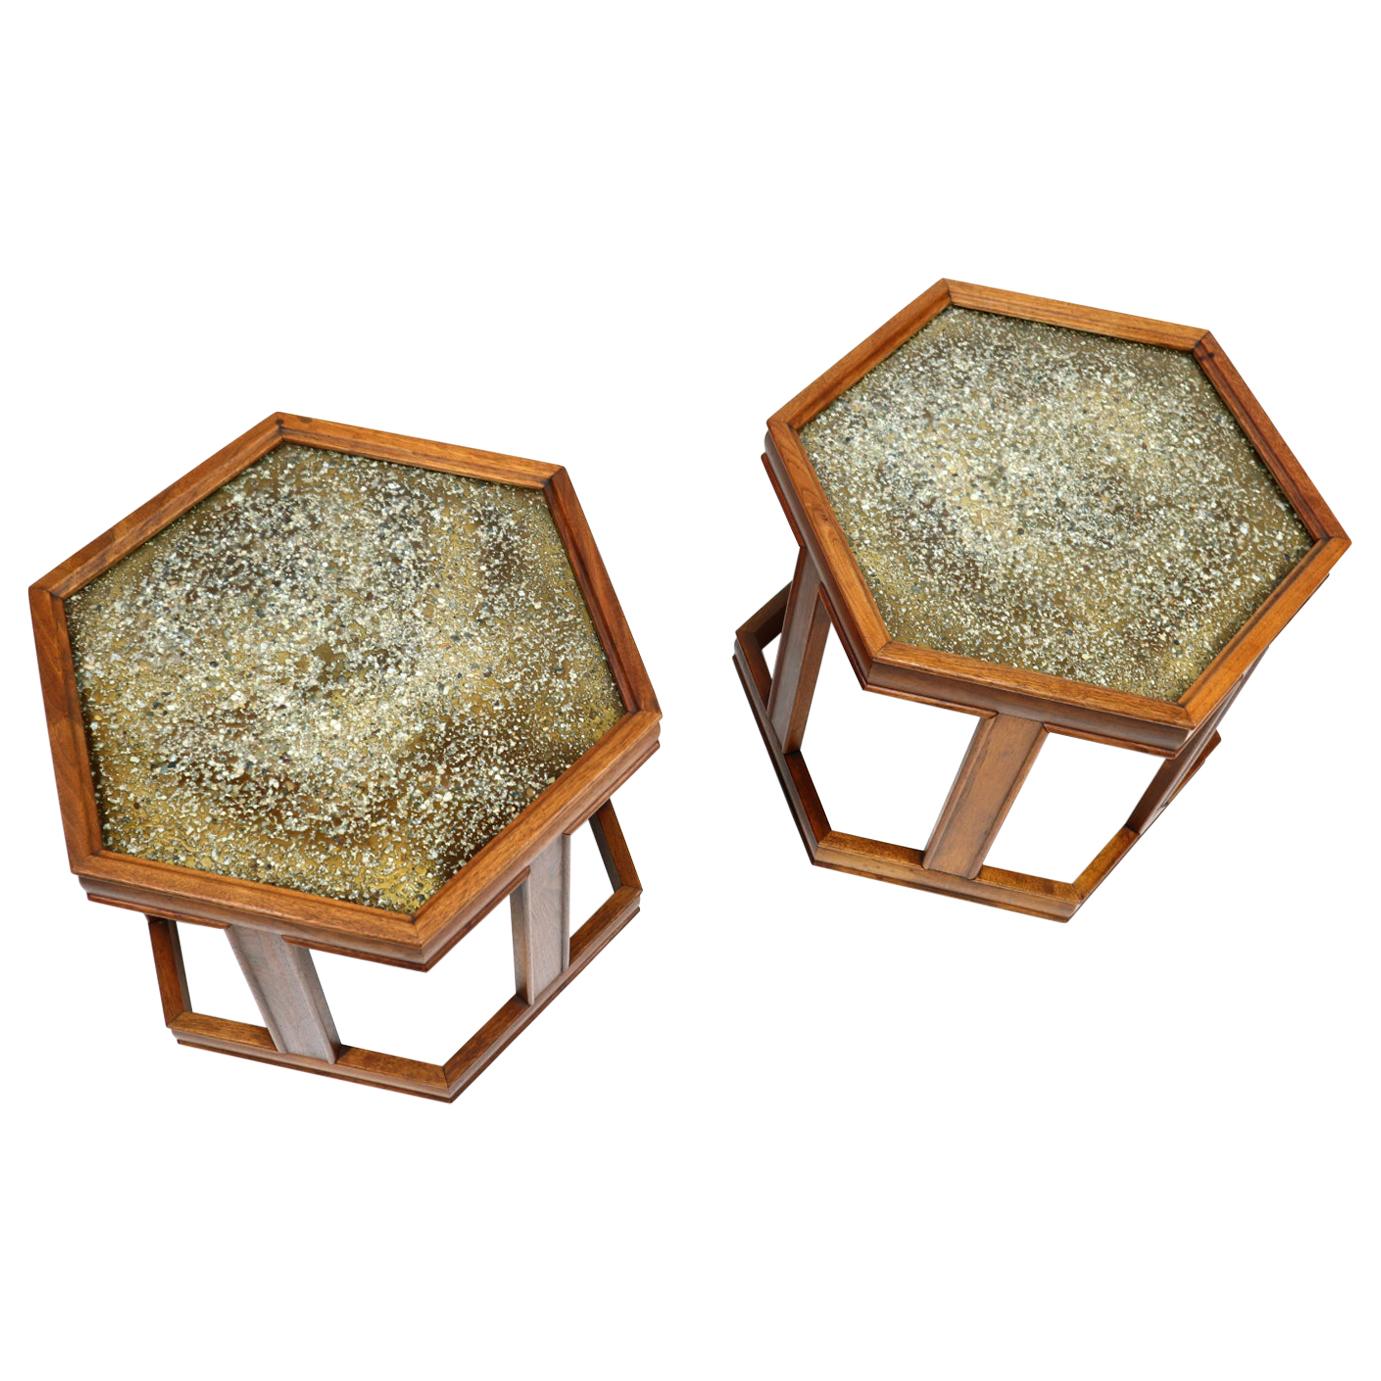 Pair of John Keal for Brown Saltman hexagonal walnut enamel side tables. This pair is time capsule quality, outstanding original condition! The six sided, small tables are ideal to be used as side tables. Push the tables together to create a coffee